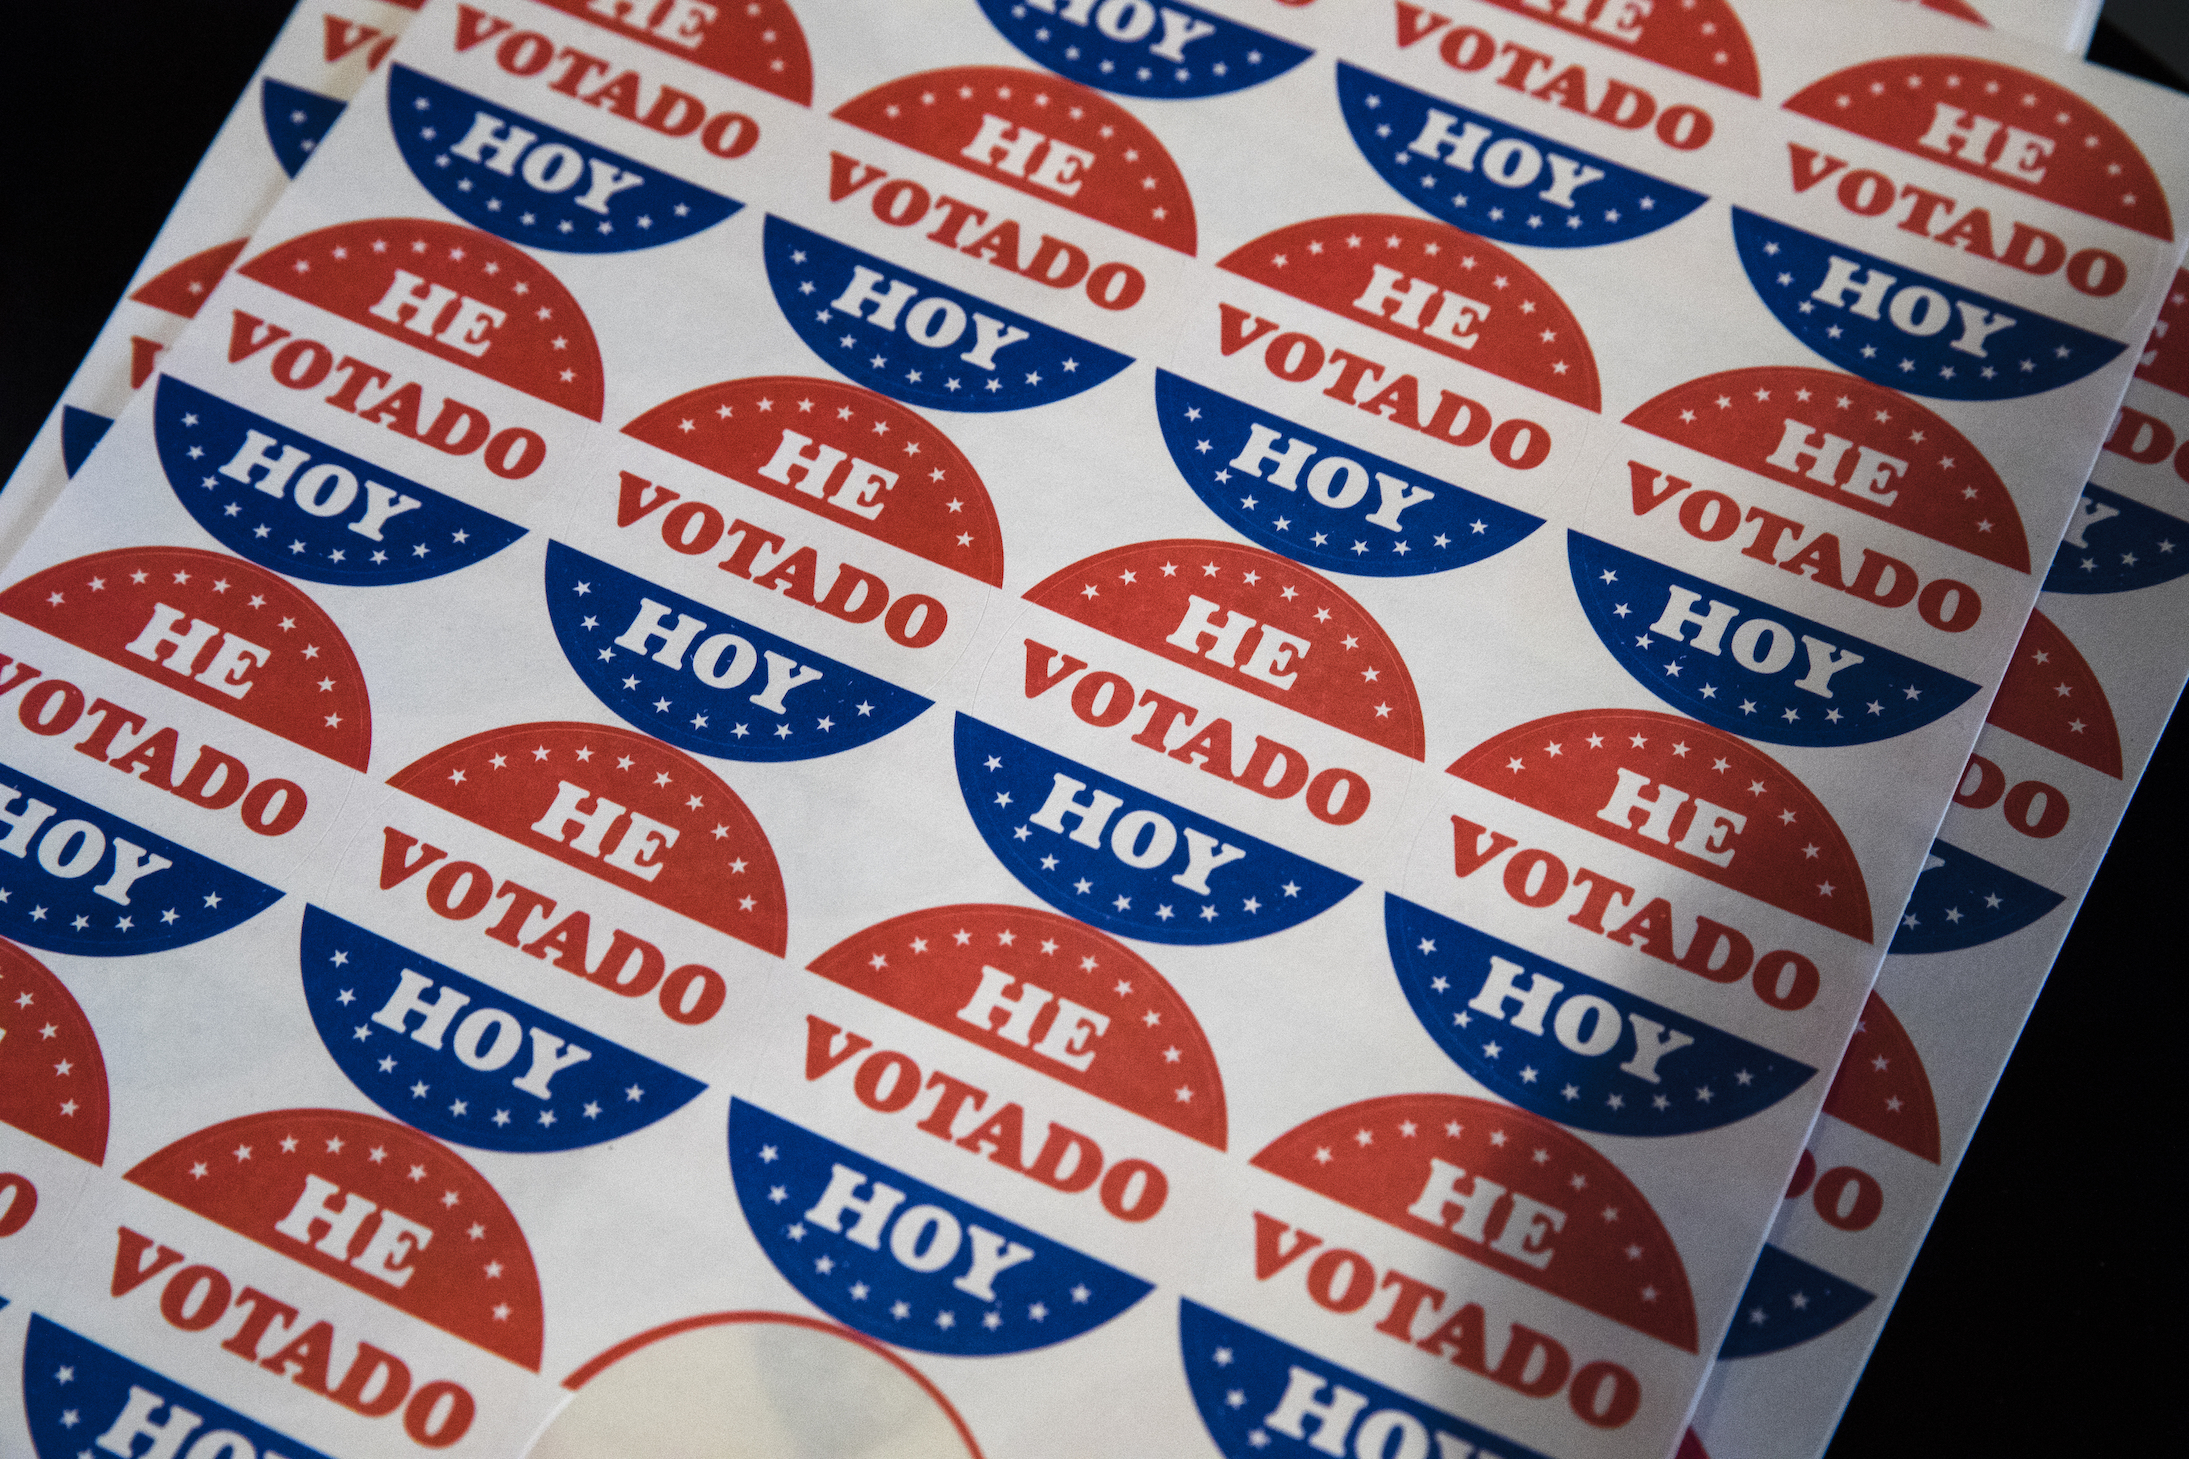 Stickers that read "He Votado Hoy," which means "I voted today" in Spanish